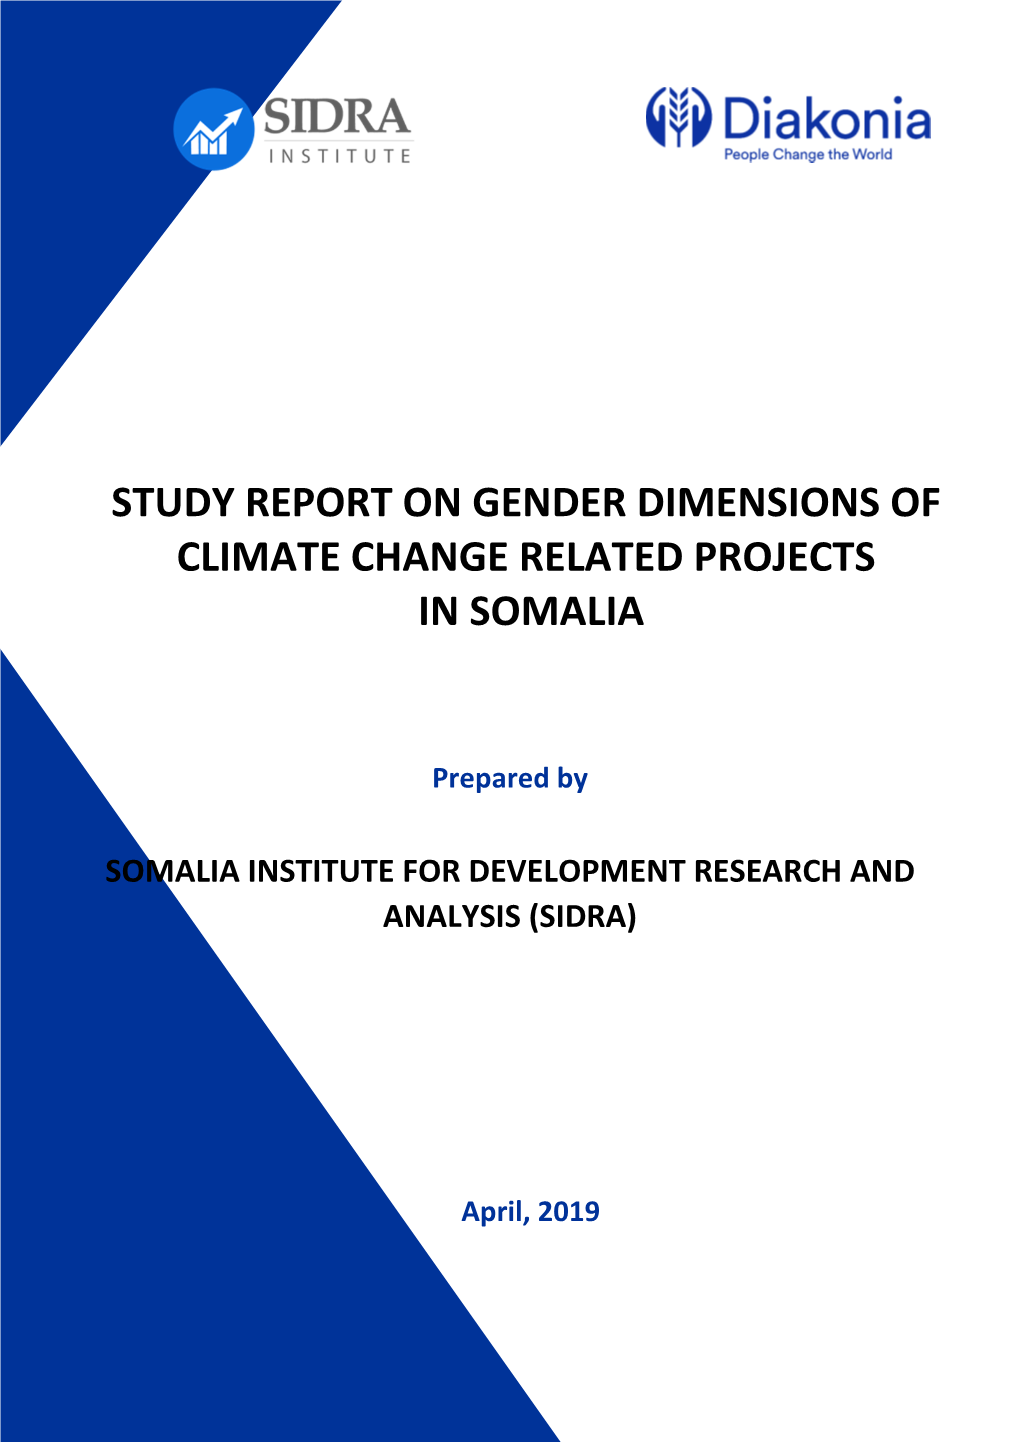 Study Report on Gender Dimensions of Climate Change Related Projects in Somalia